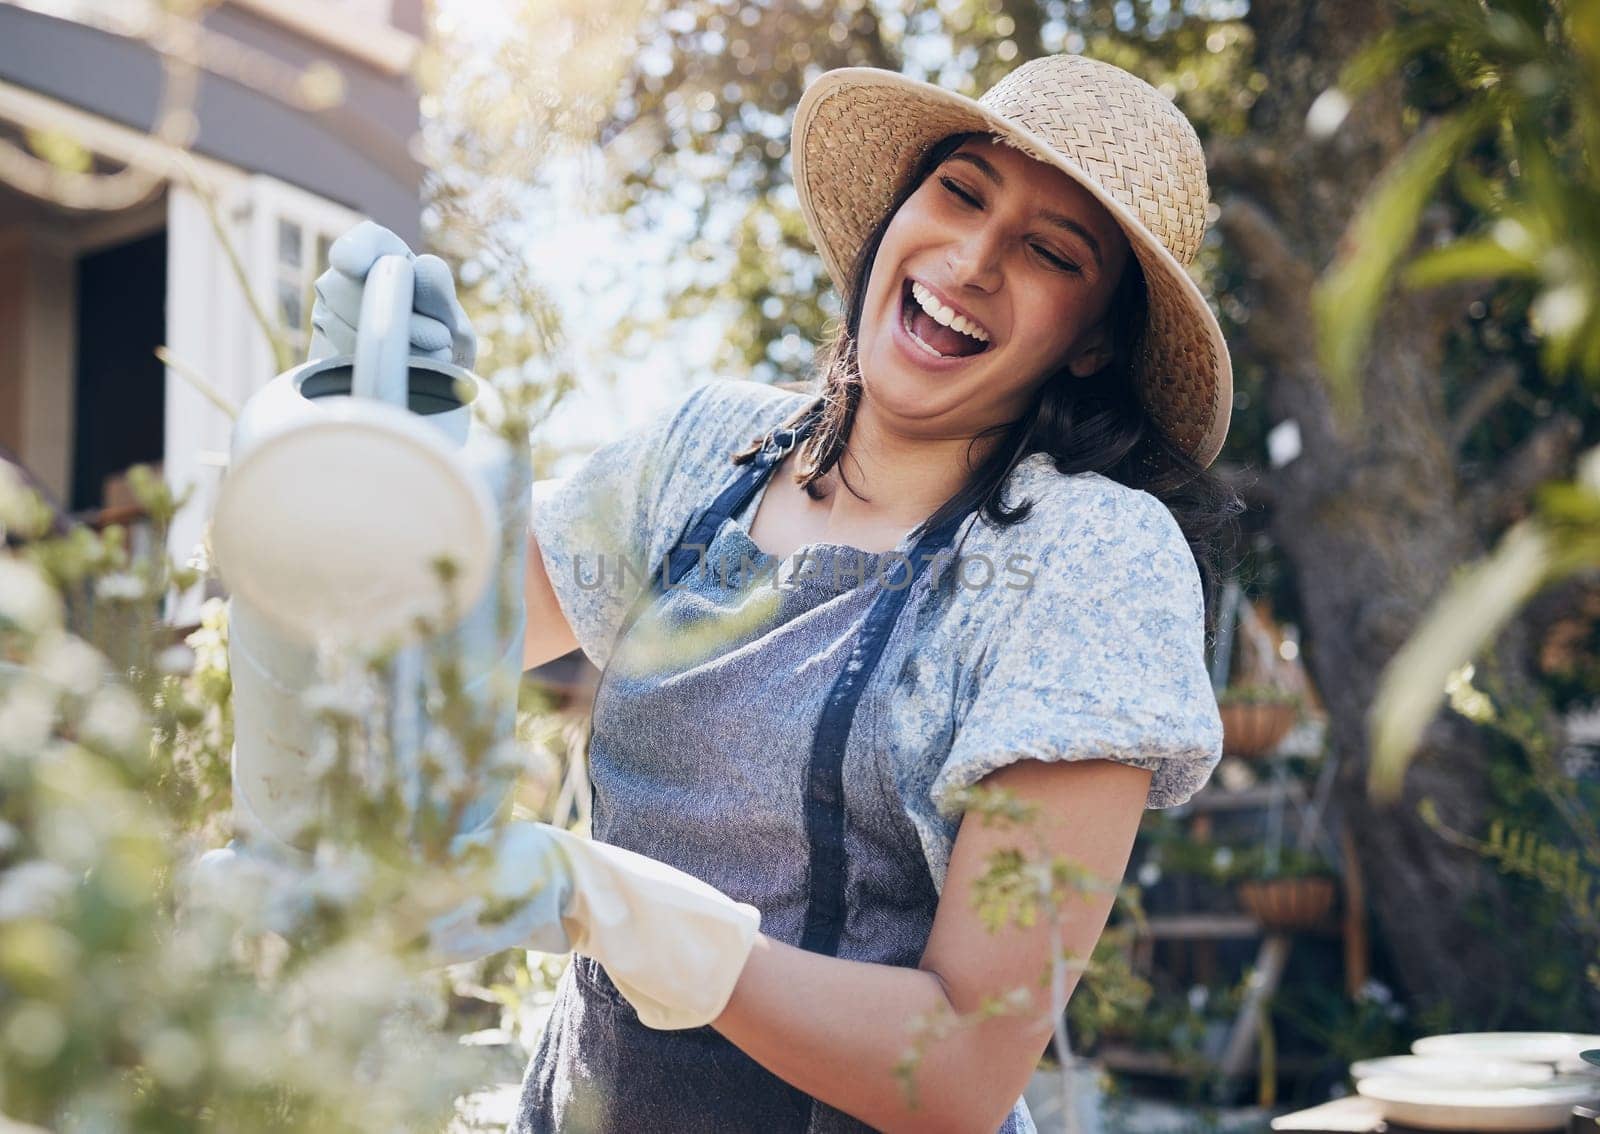 Laughing, watering and woman gardening with plants for growth, development and irrigation of agriculture. Happy, funny florist or girl farming for fresh nature, horticulture and floral sustainability.